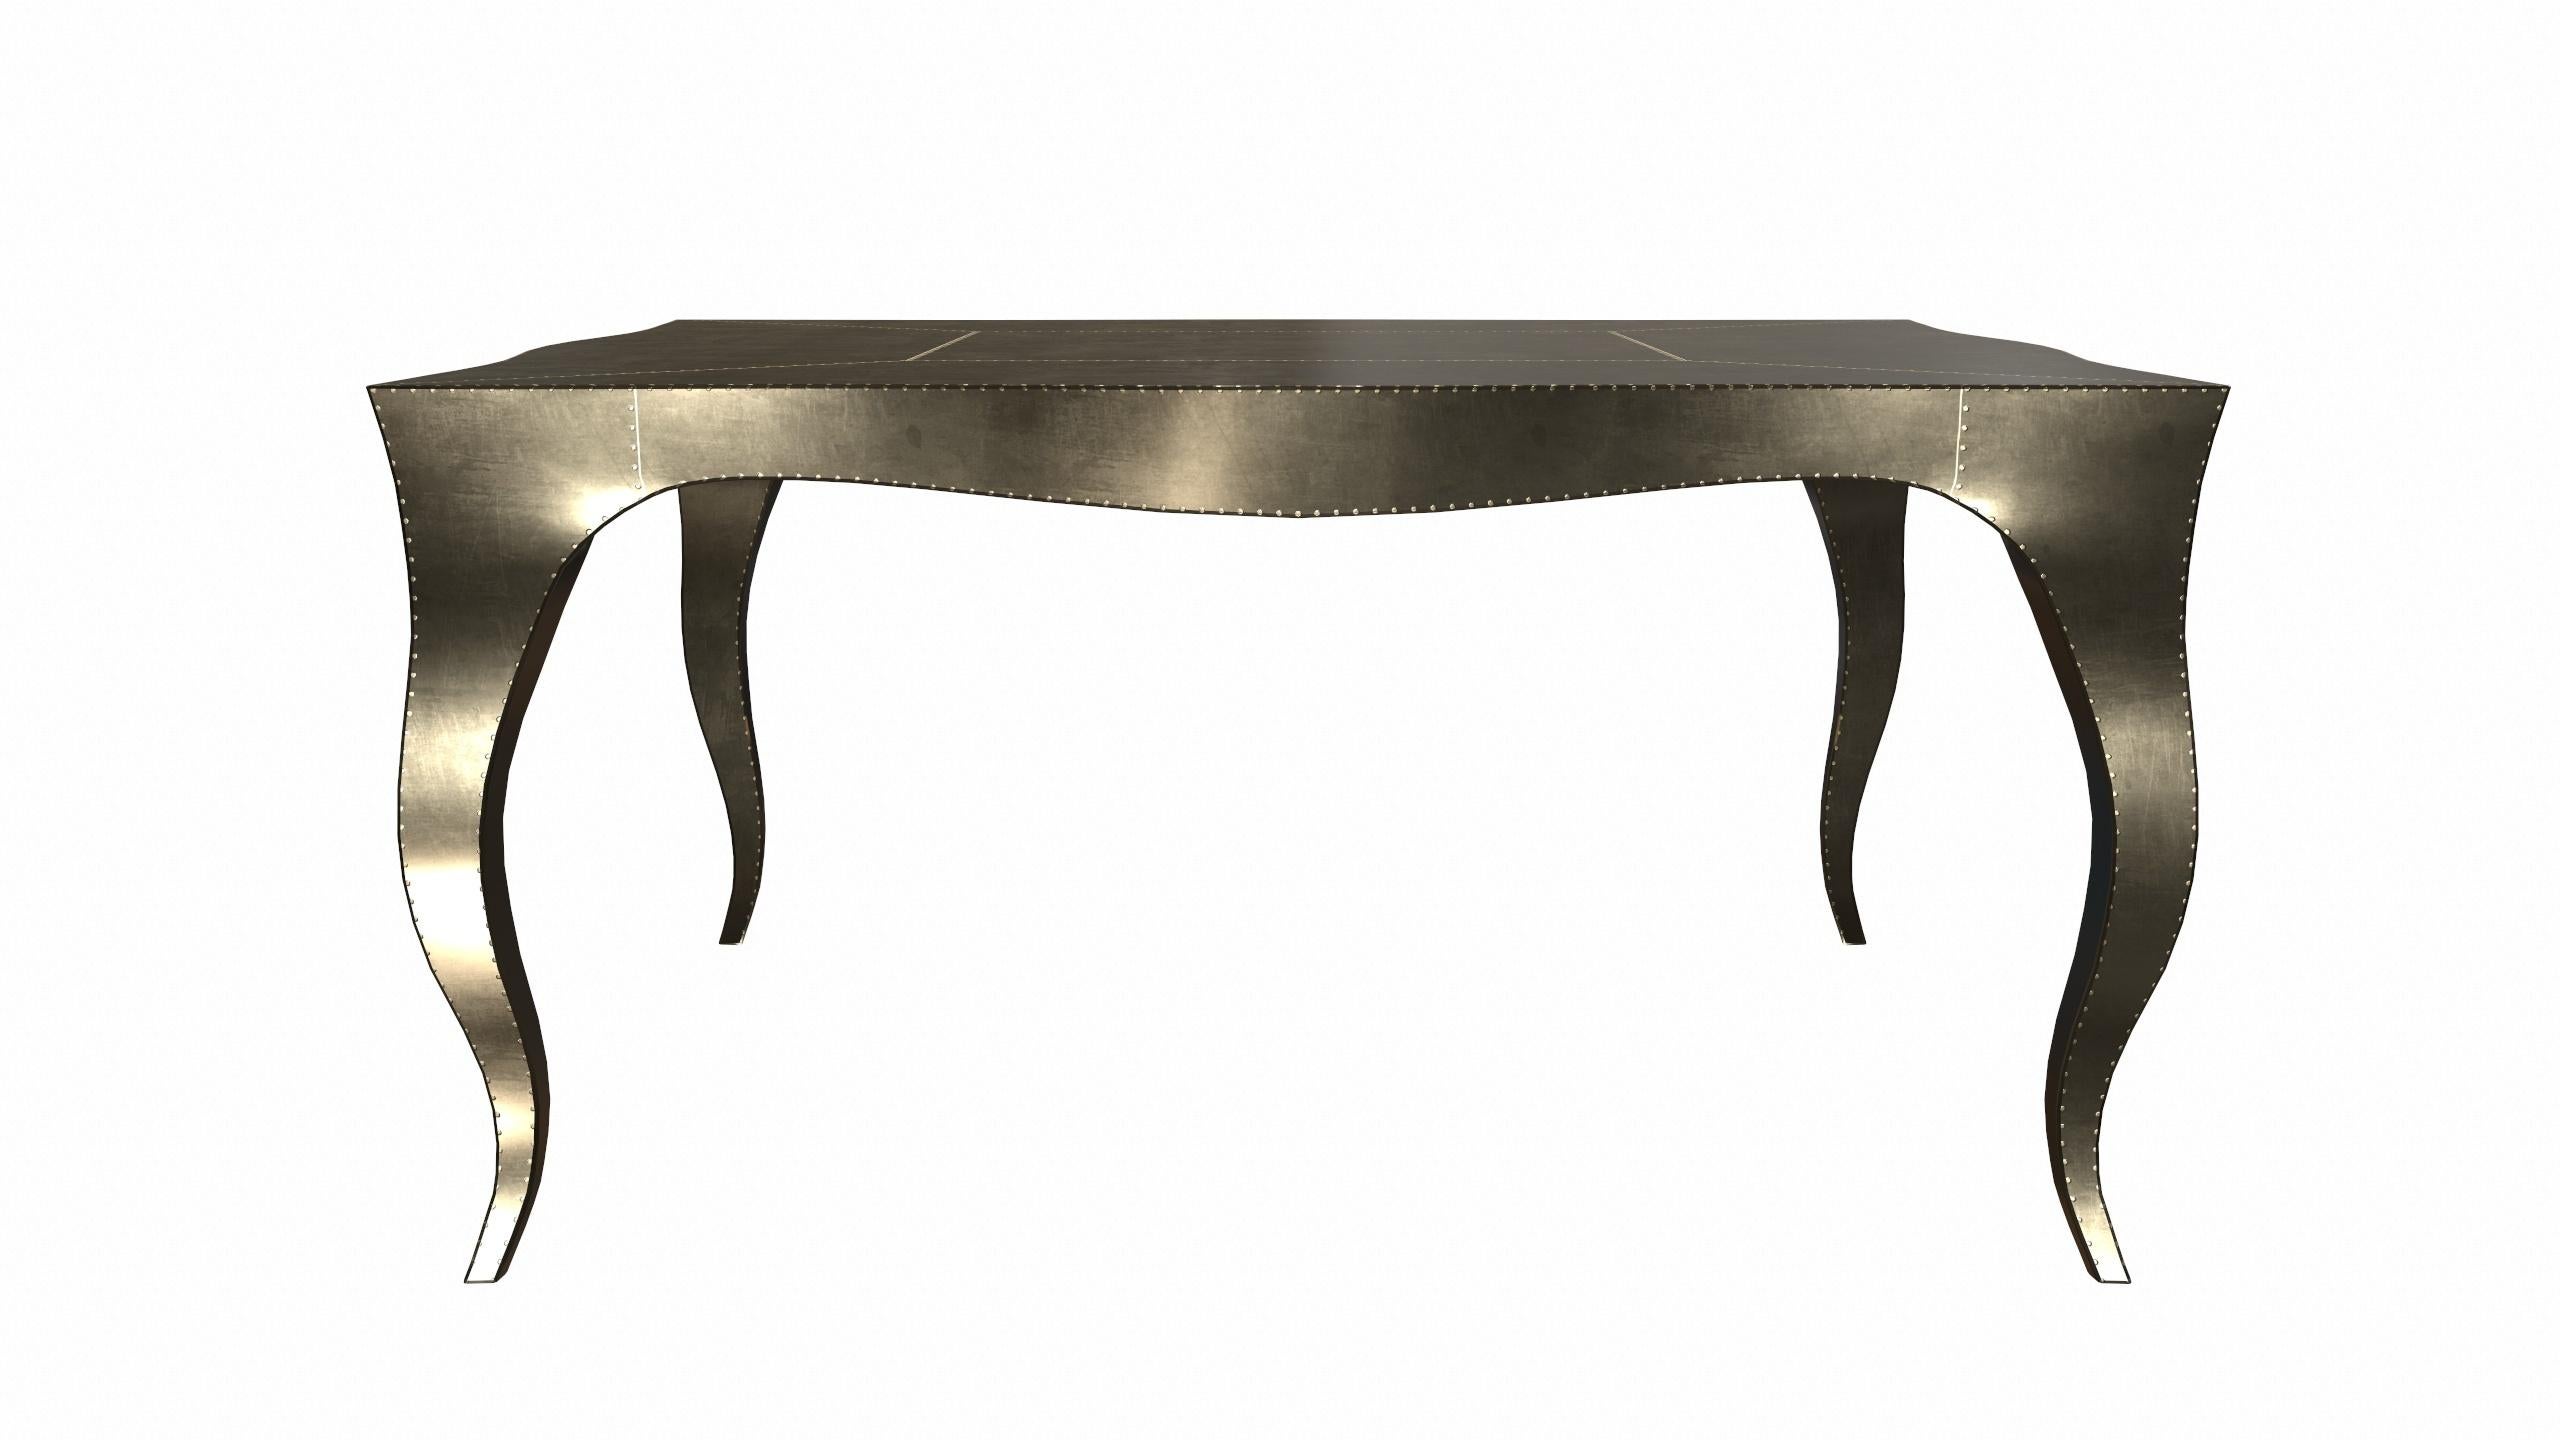 Painted Louise Art Deco Nesting Tables Smooth Brass 18.5x18.5x10 inch by Paul M For Sale